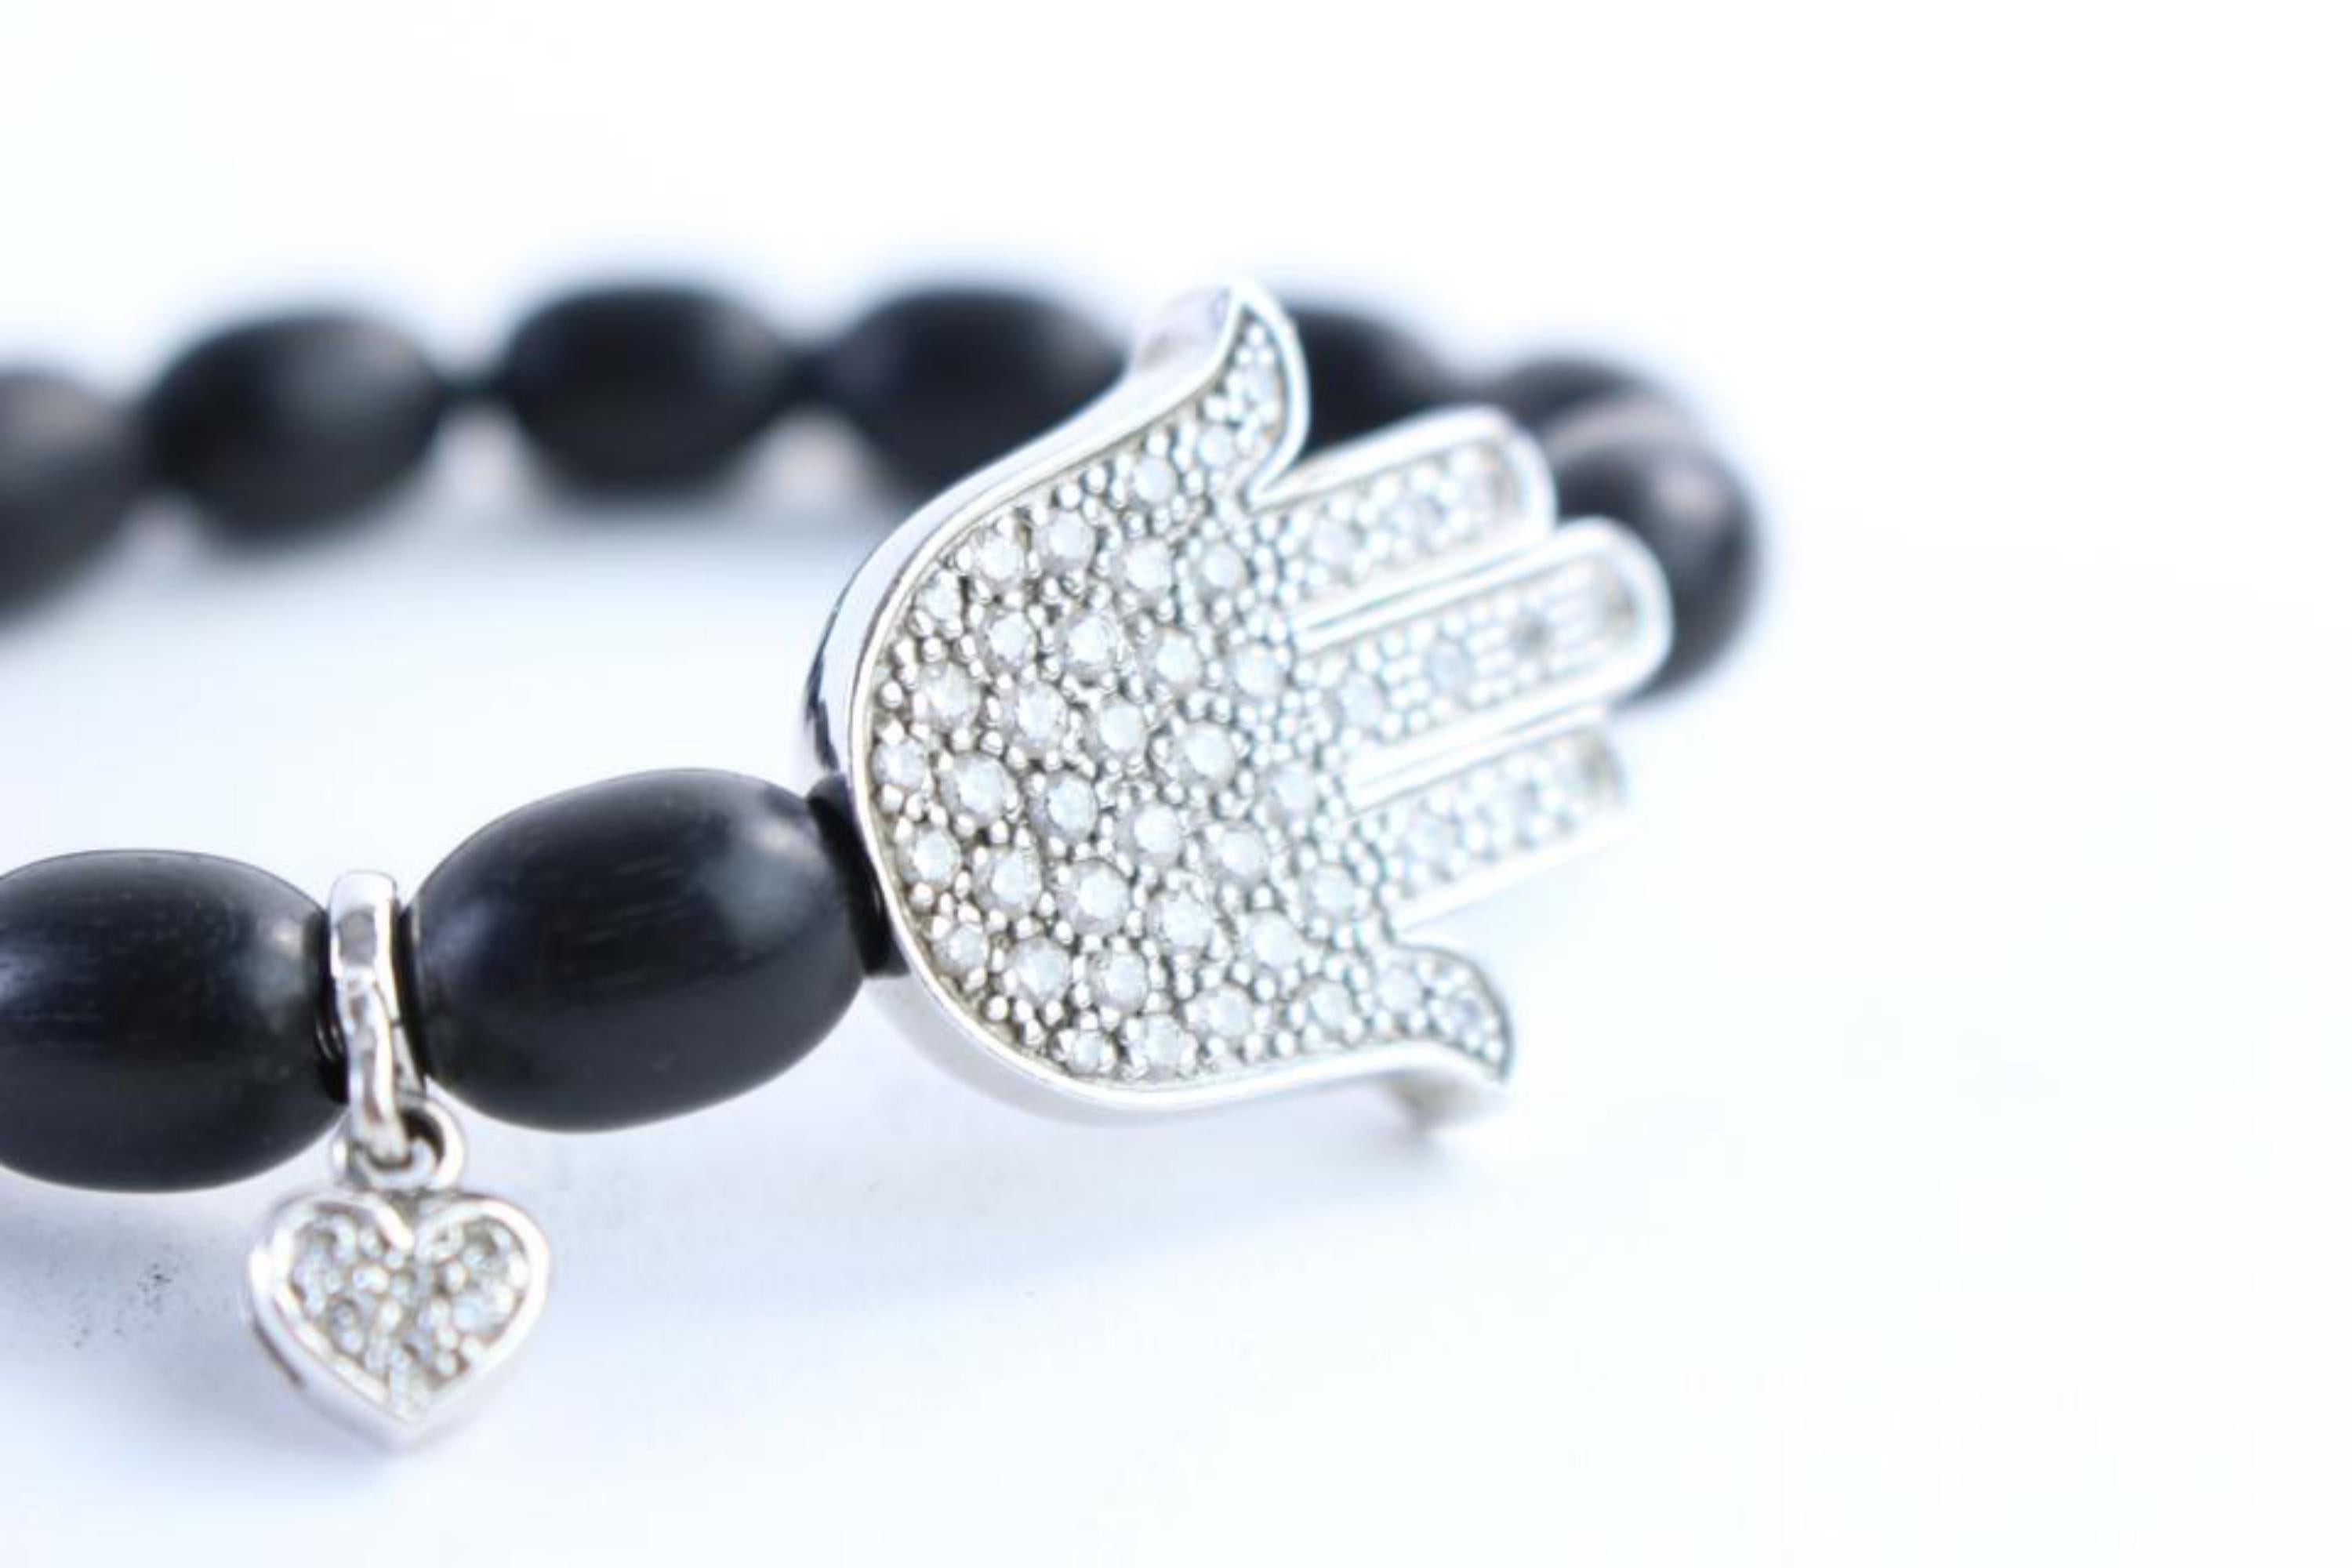 Aspery & Guldag Black 14k Hamsa X Heart Bead Bracelet 12mr0312 In Excellent Condition For Sale In Forest Hills, NY